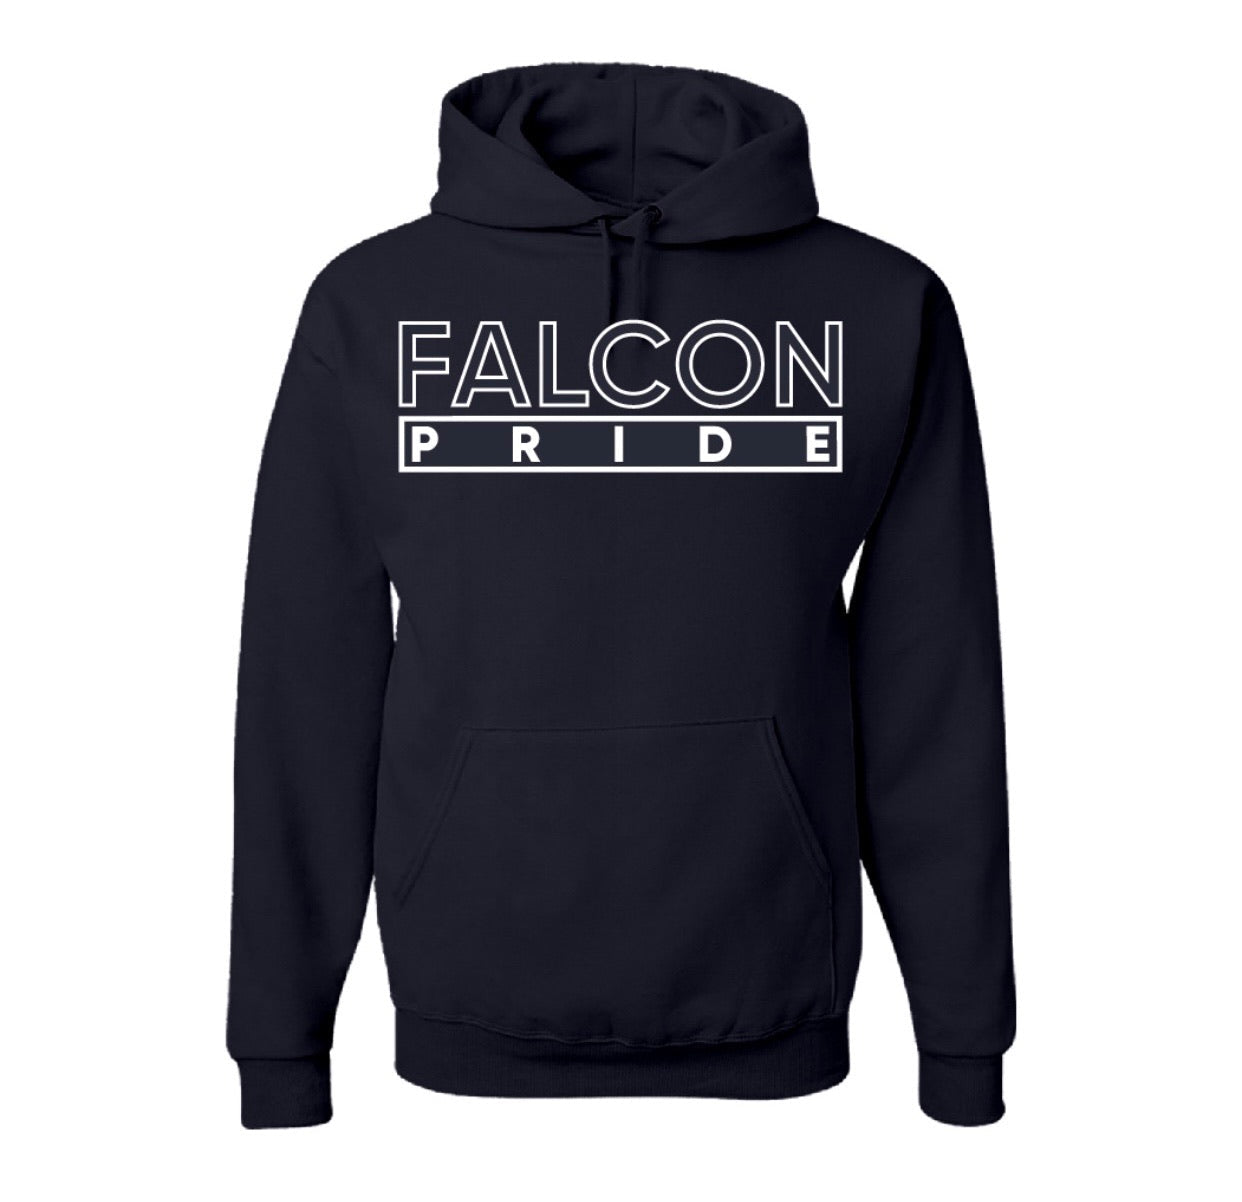 The “Falcon Pride” Hoodie/Crewneck in Navy Blue/White (NC)